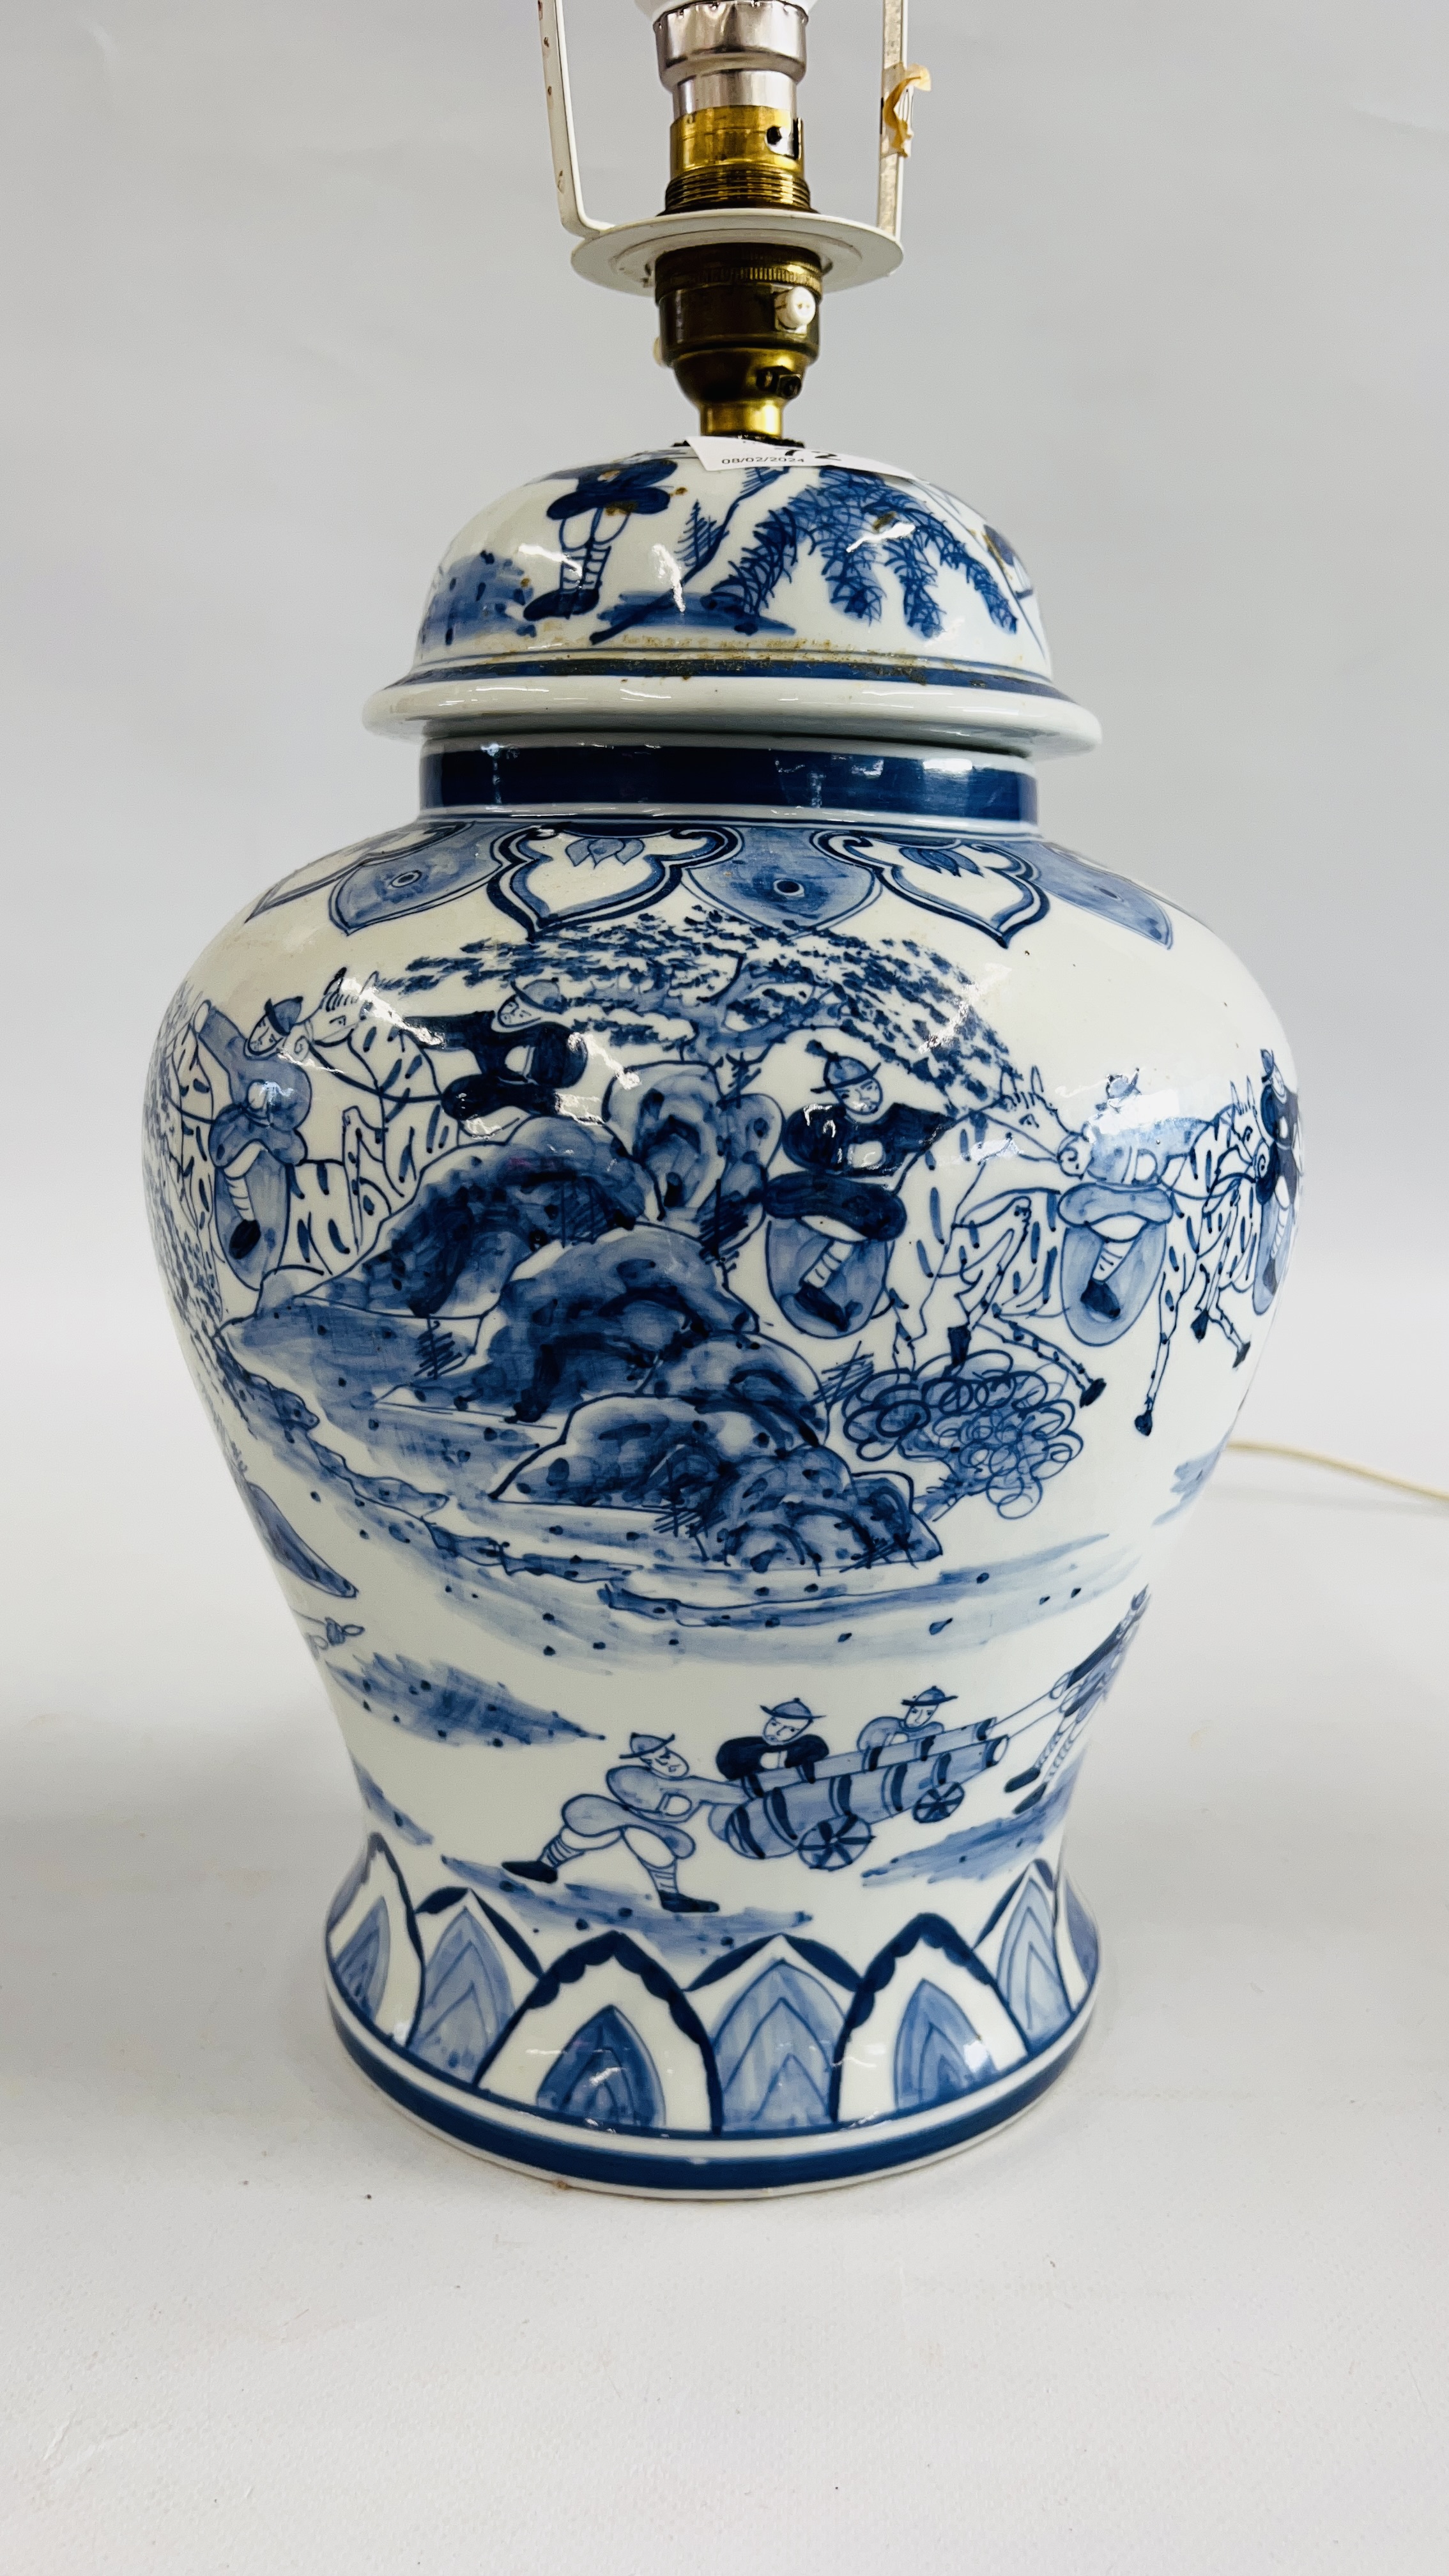 A VINTAGE STYLE BLUE AND WHITE ORIENTAL GINGER JAR LAMP, H 30CM - SOLD AS SEEN.